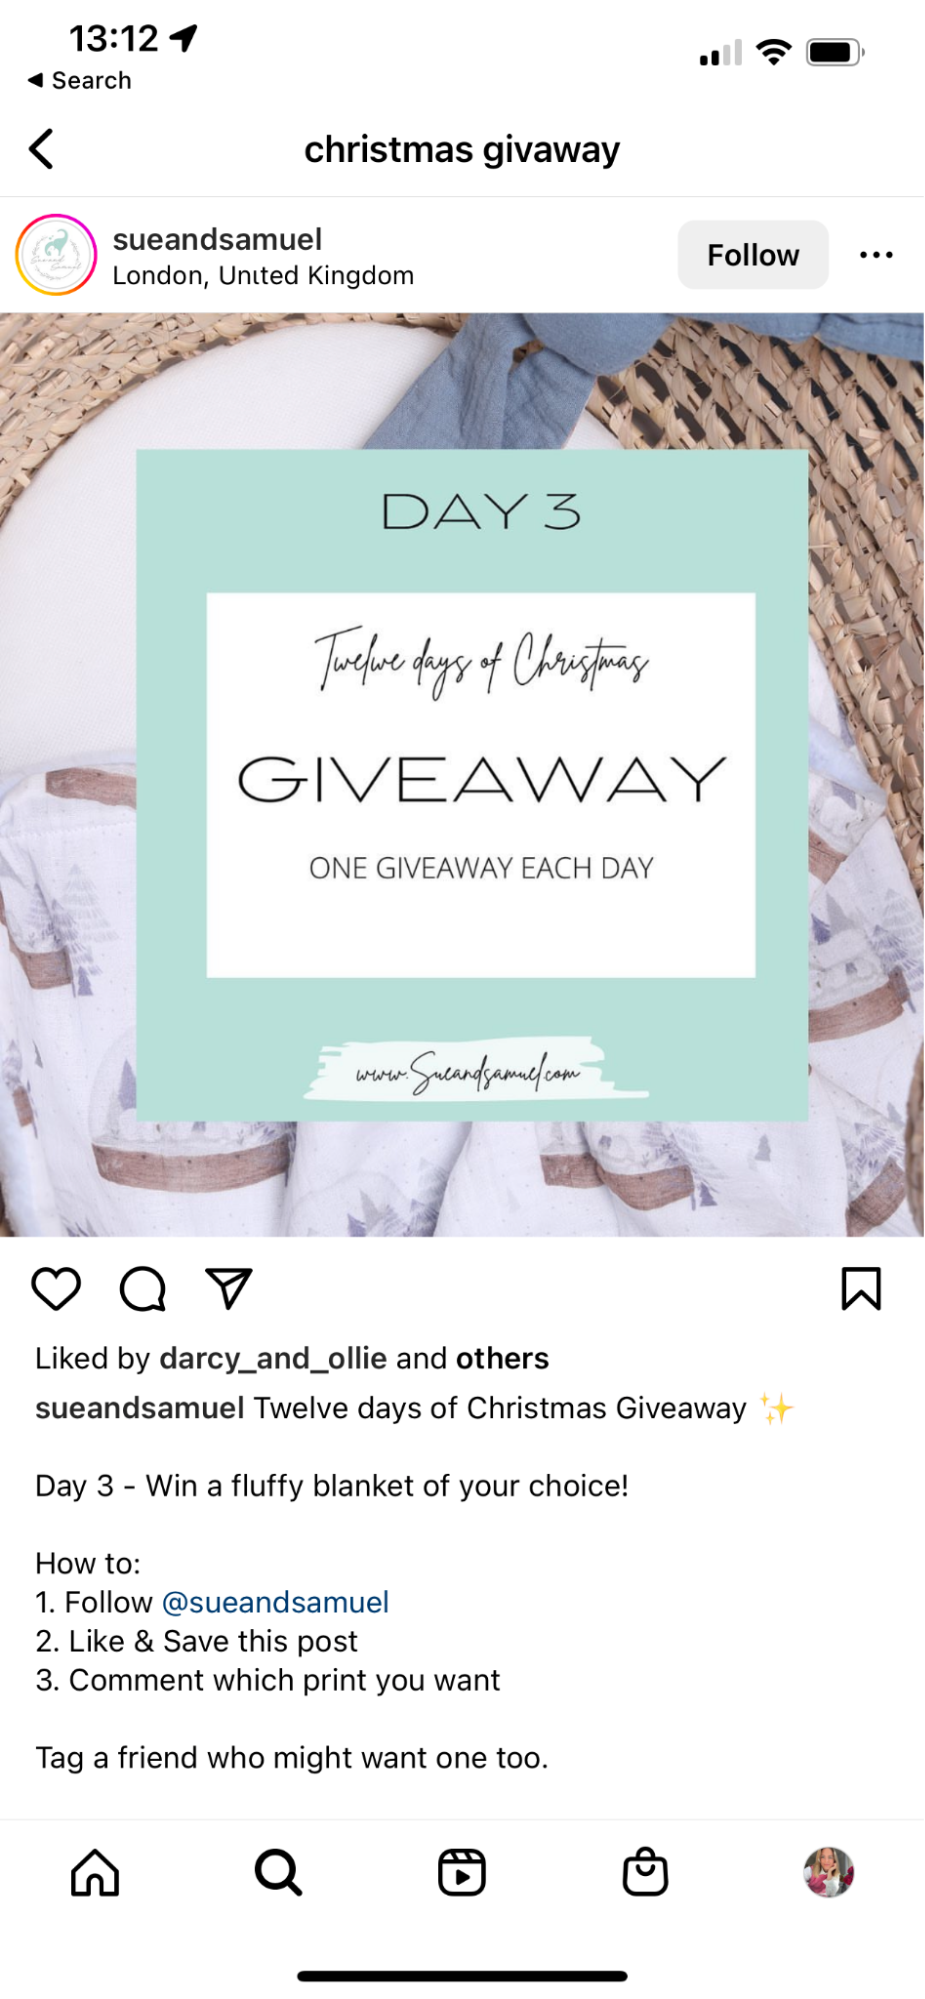 Sue and Samuel’s Instagram Christmas giveaway.